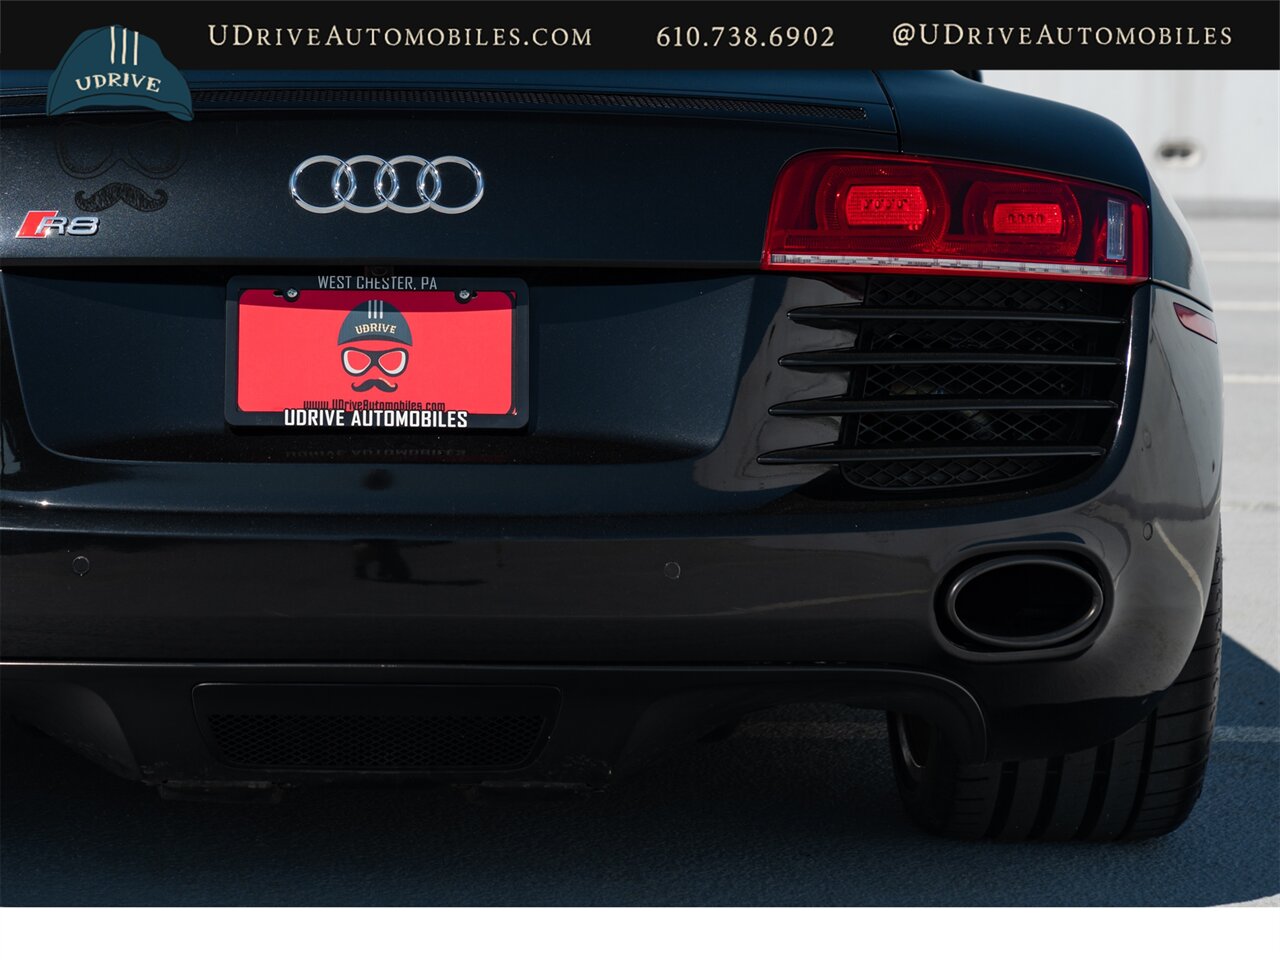 2009 Audi R8 Quattro  4.2L V8 6 Speed Manual - Photo 20 - West Chester, PA 19382